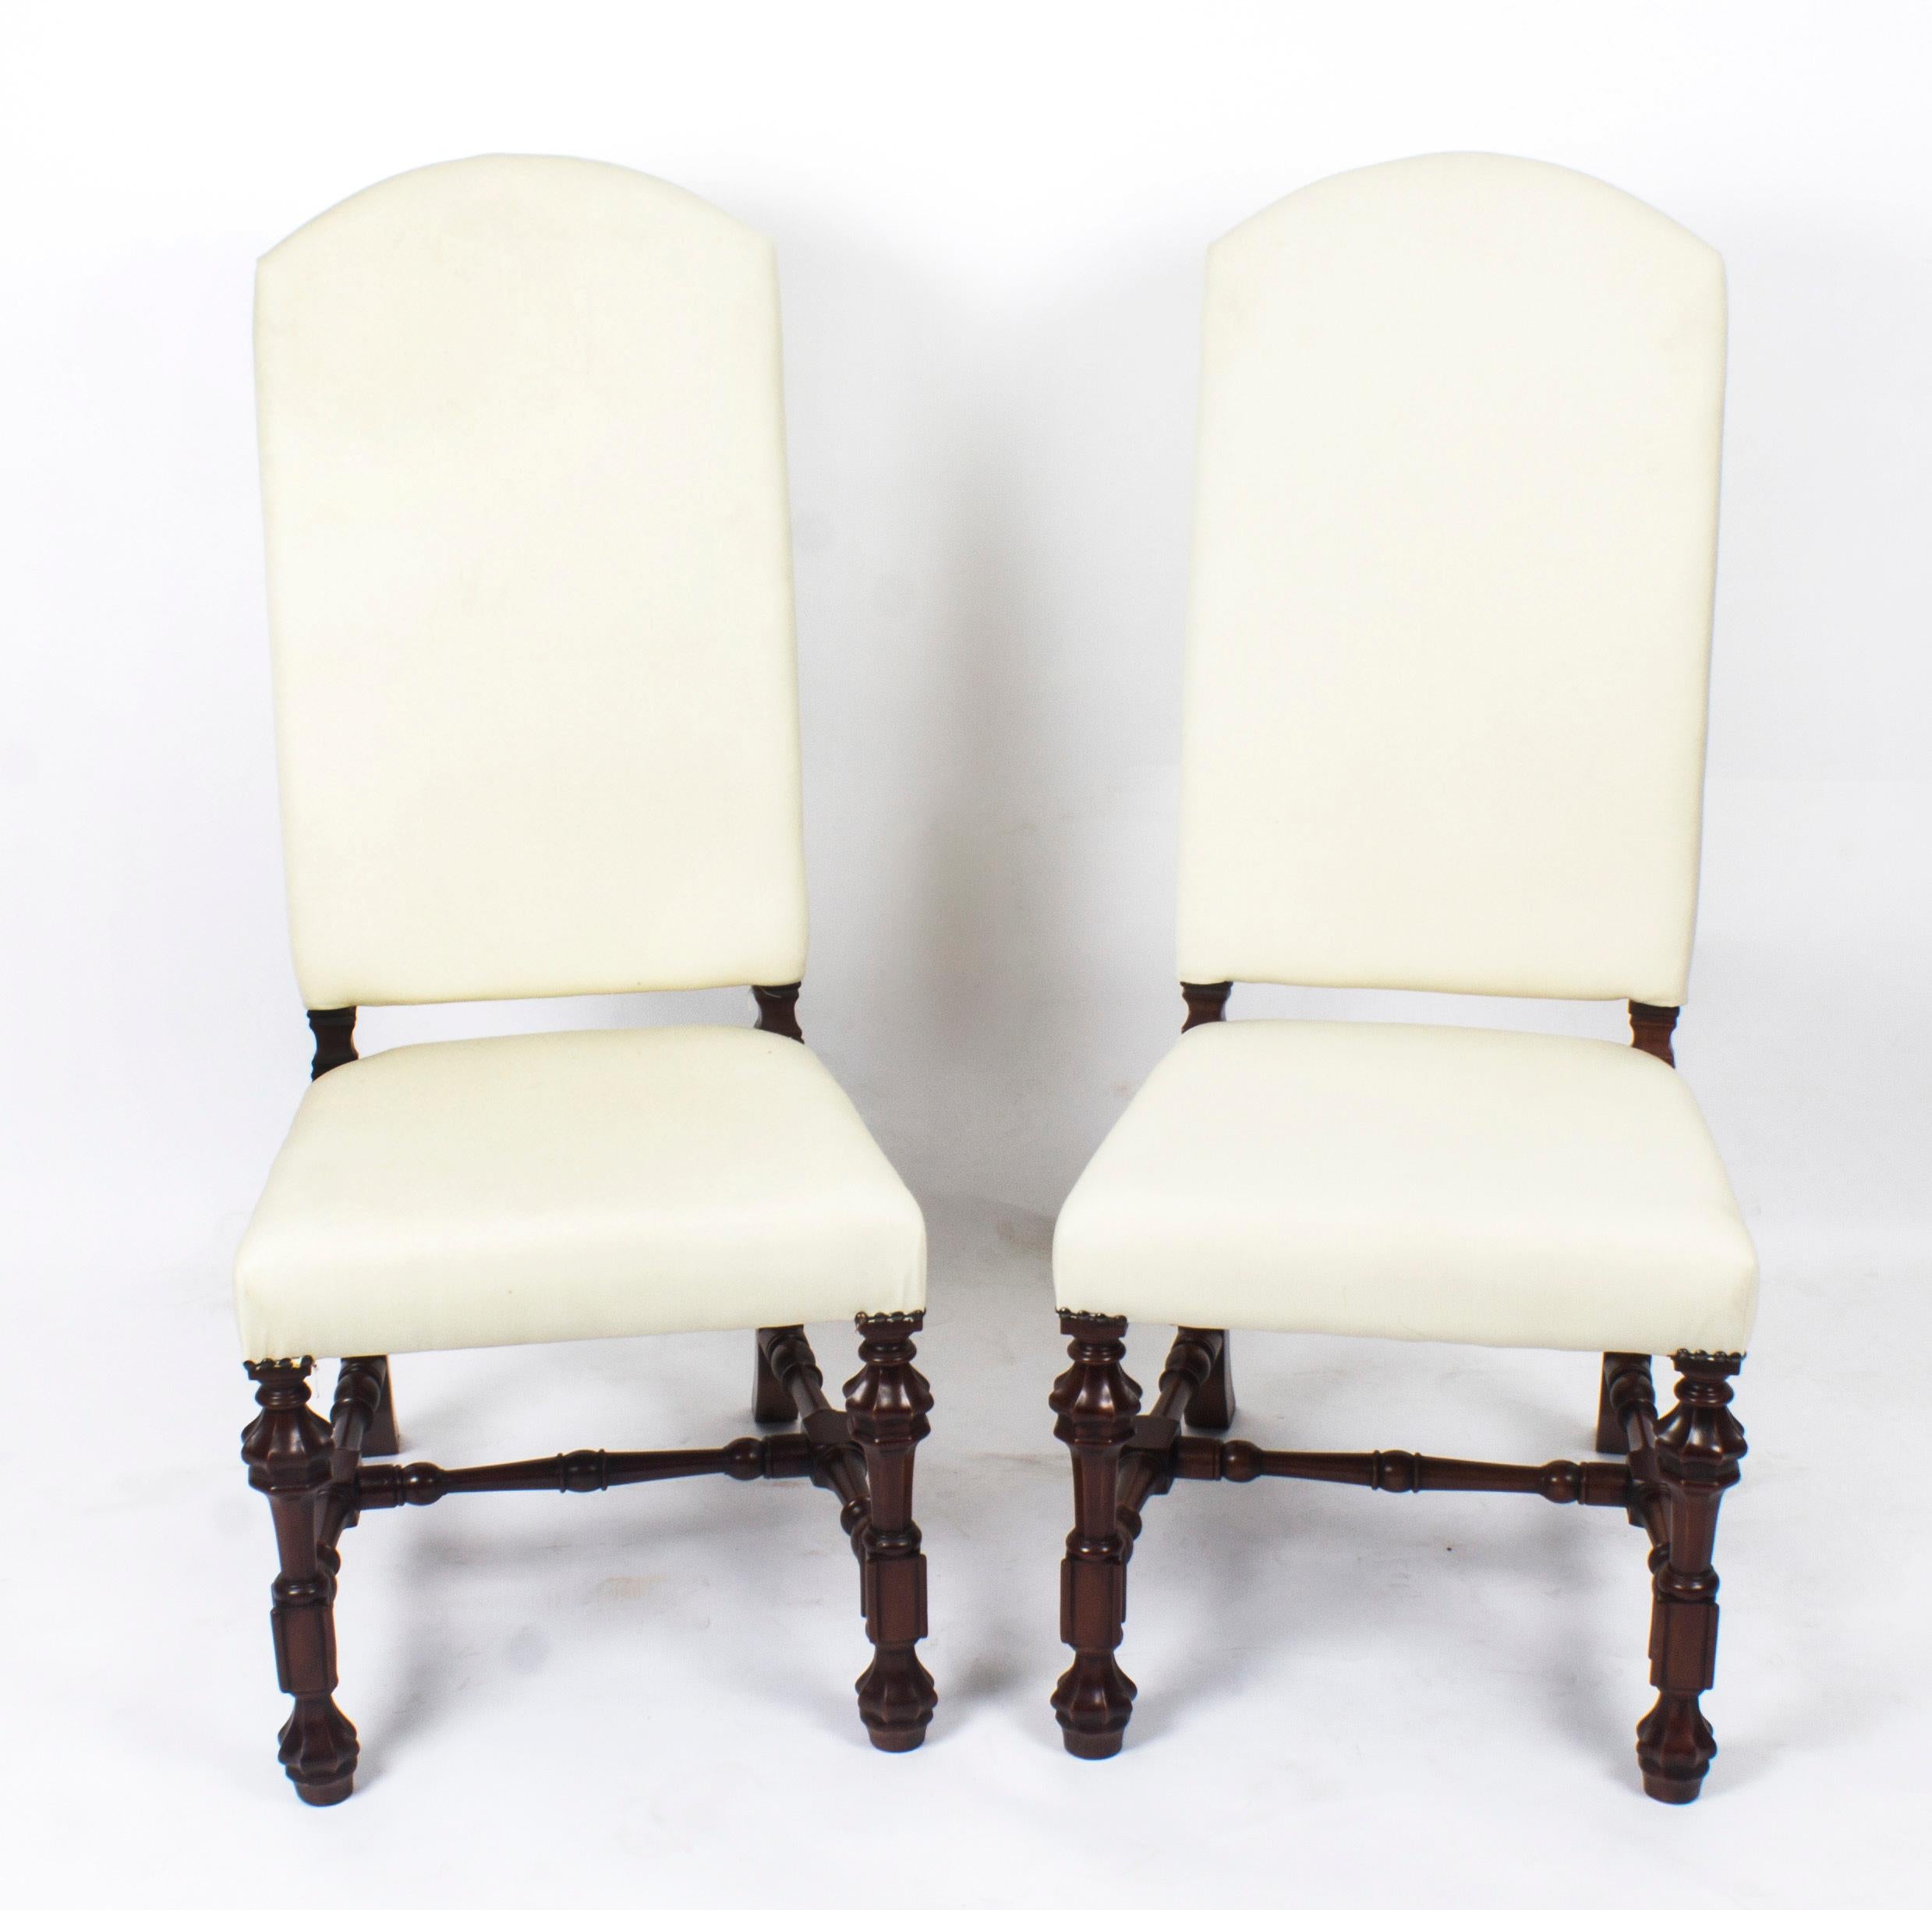 Vintage Pair of Carolean Style Upholstered High Back Dining Chairs, 20th Century For Sale 5